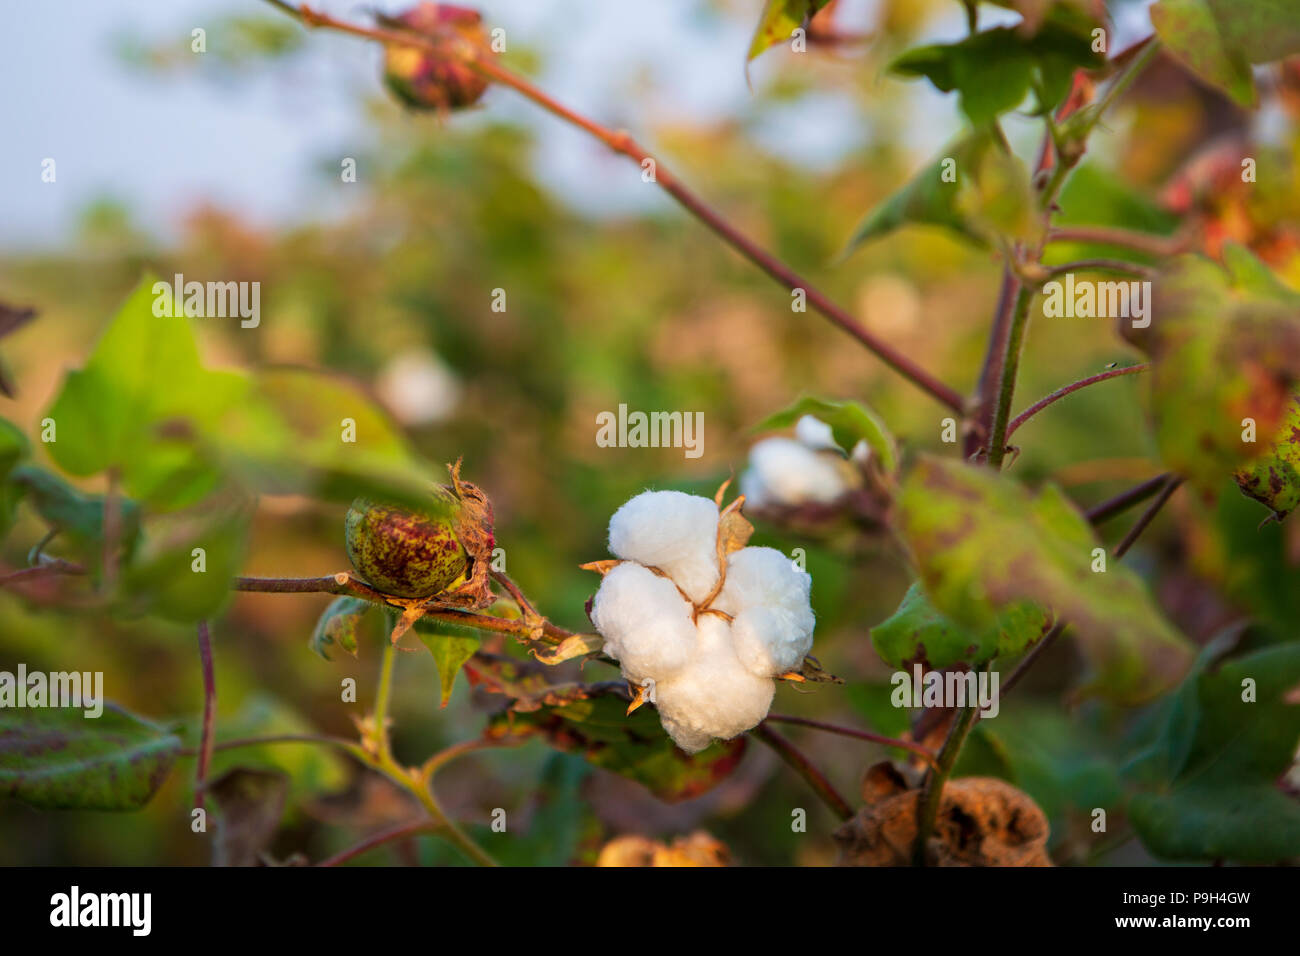 An organic cotton ball growing on a cotton plant, India. Stock Photo